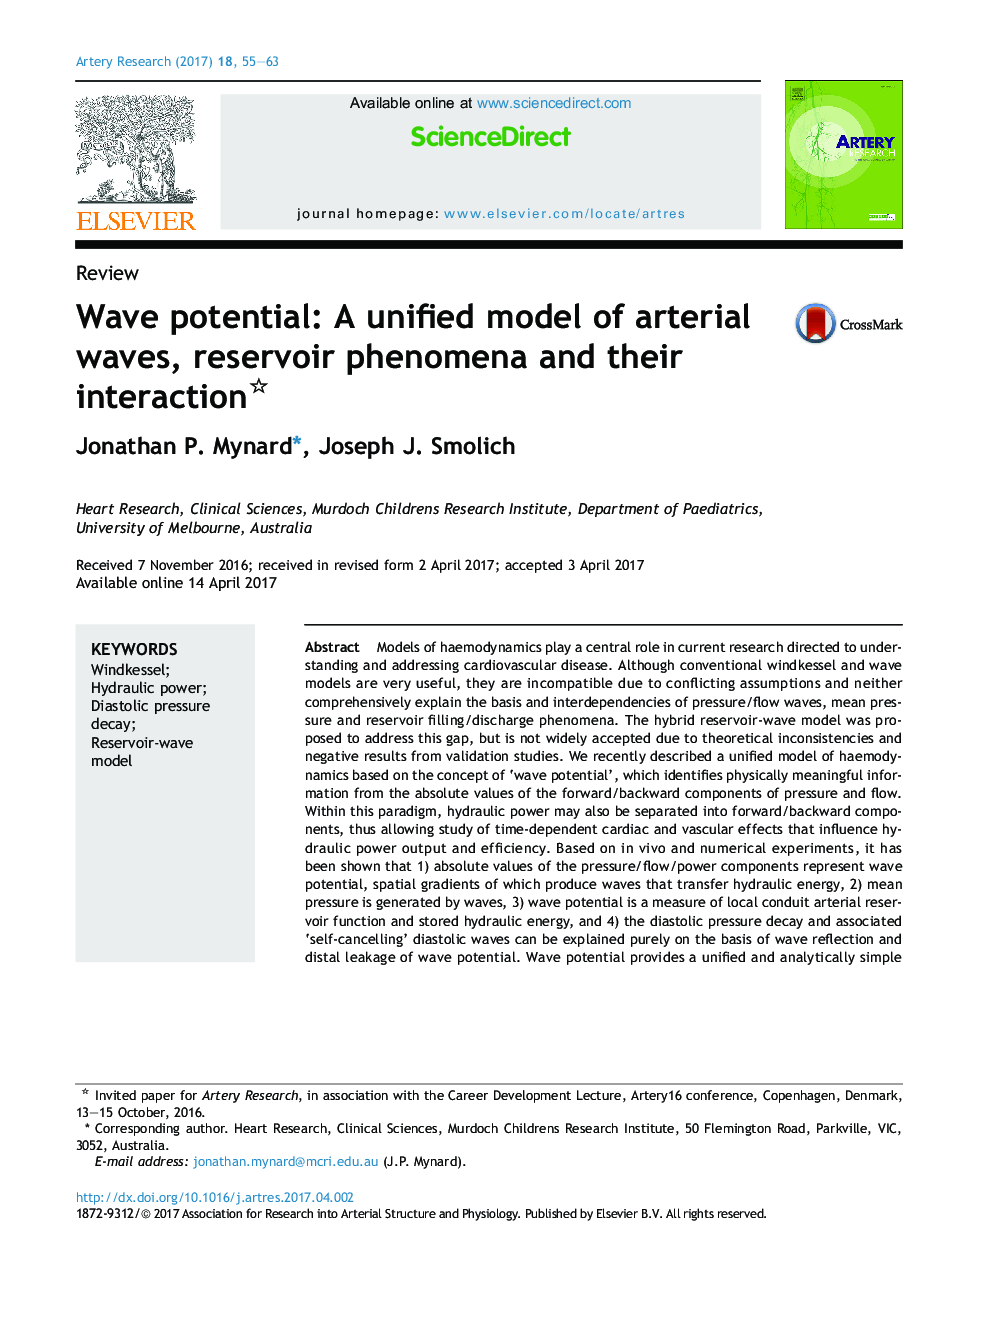 Wave potential: A unified model of arterial waves, reservoir phenomena and their interaction